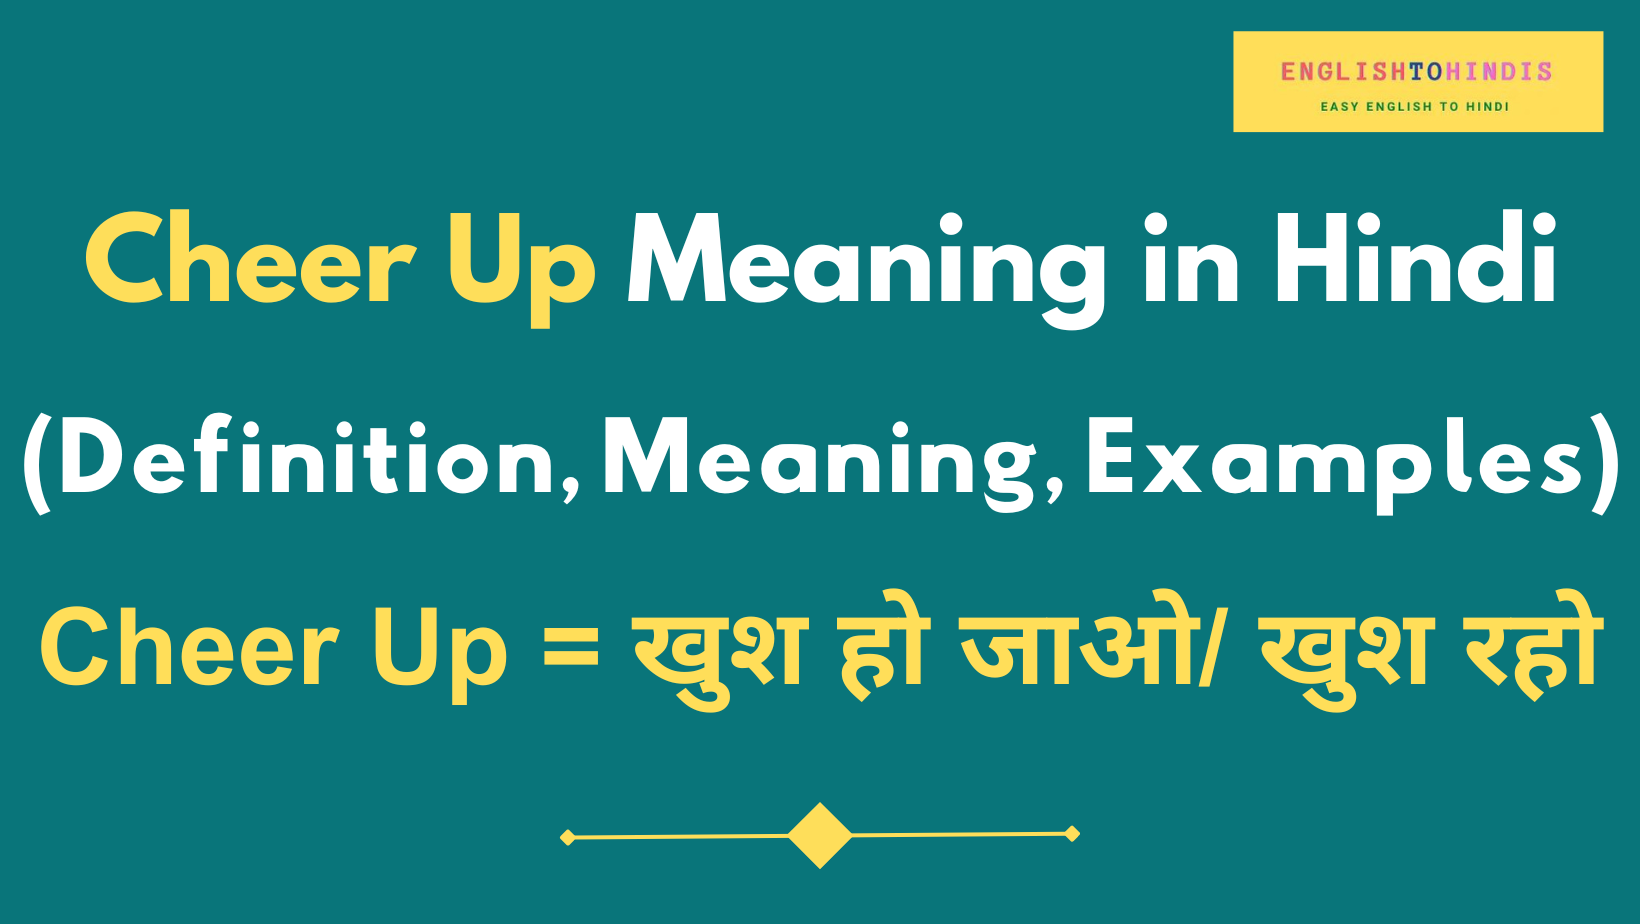 Cheer Up Meaning in Hindi